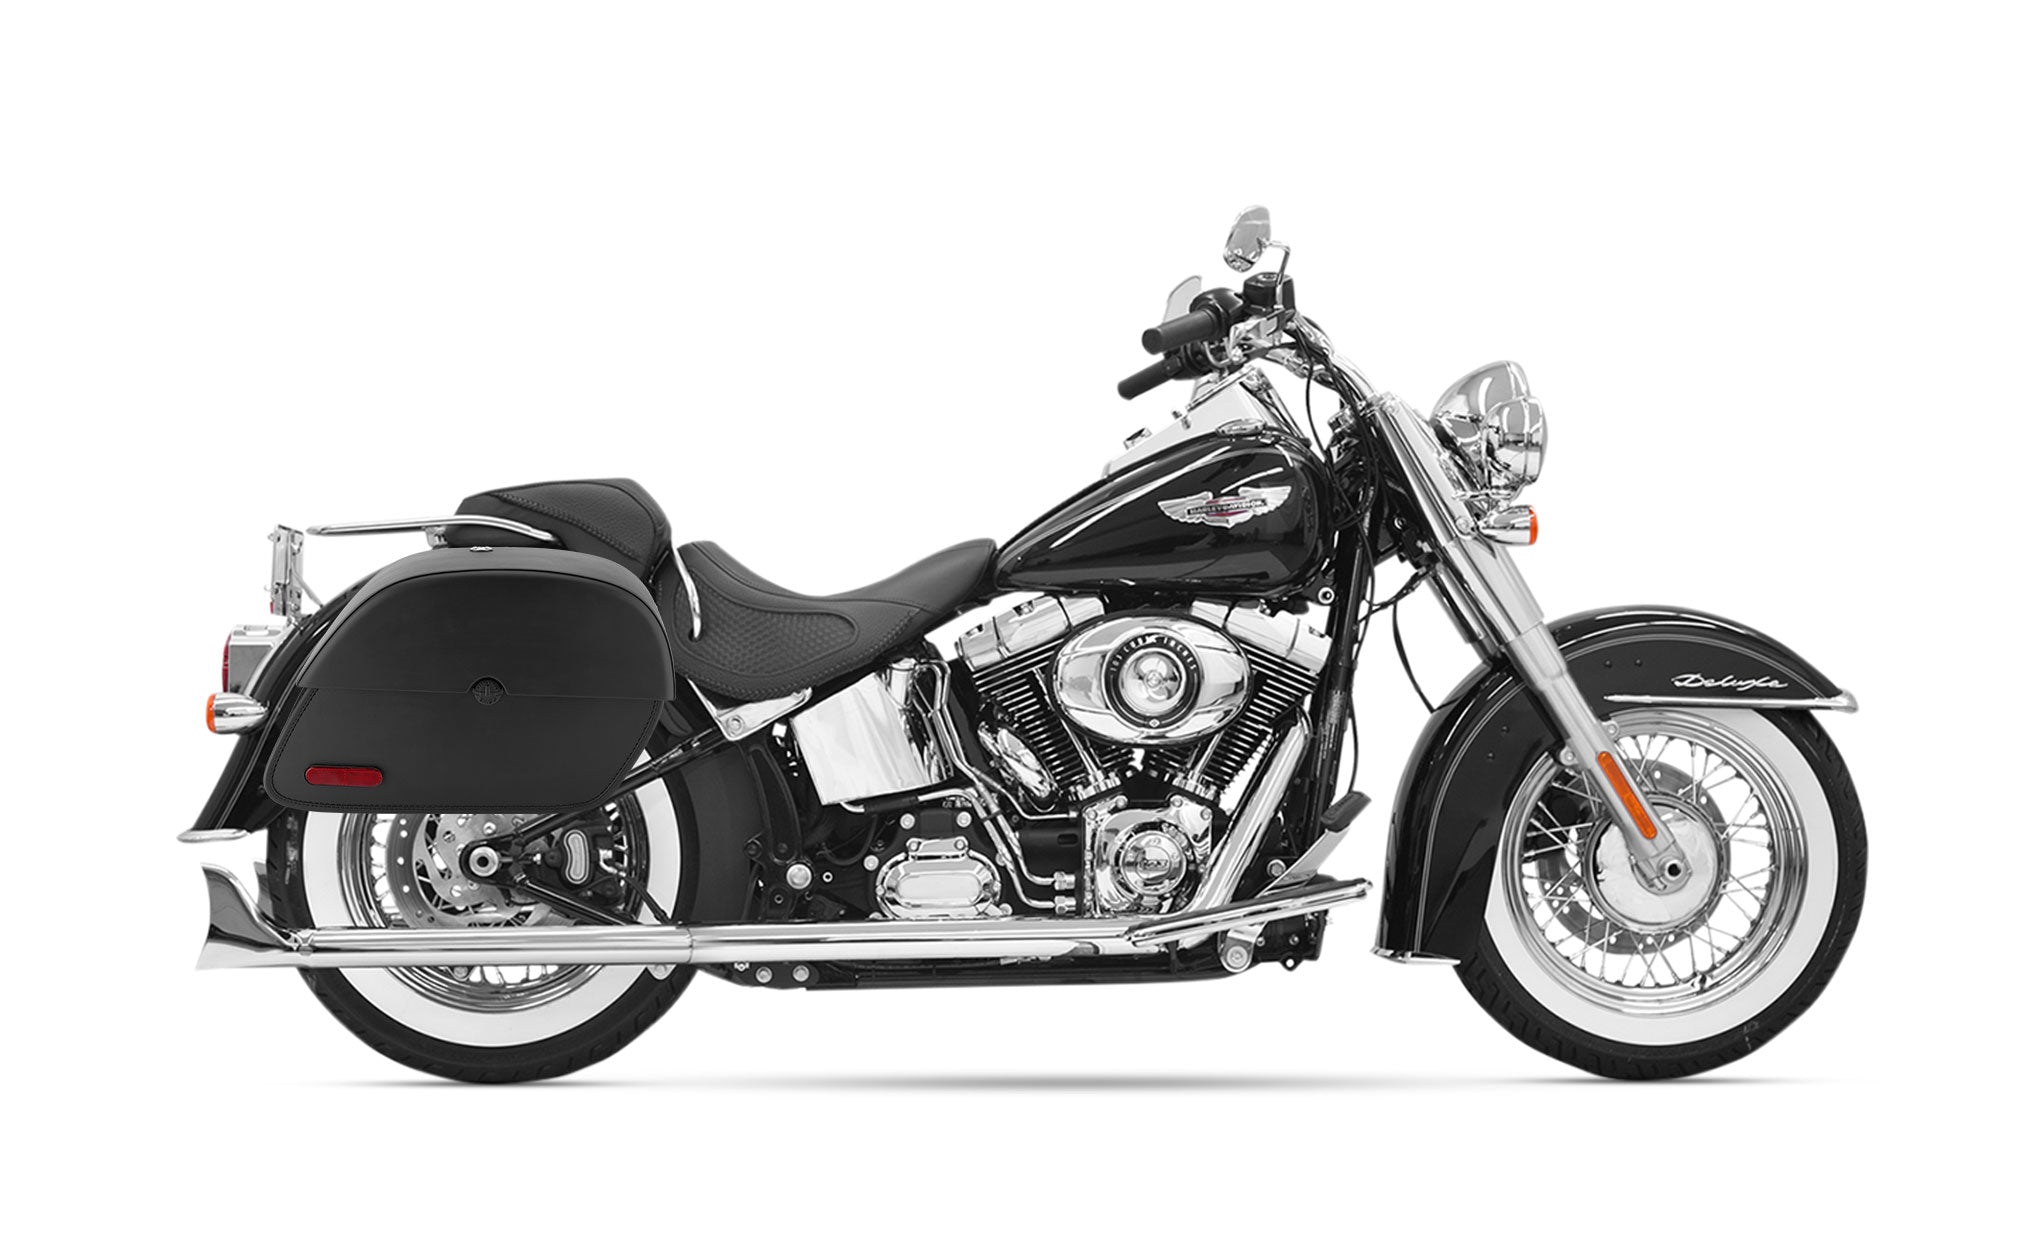 33L - Panzer Large Motorcycle Saddlebags for Harley Softail Heritage FLSTICCI on Bike Photo @expand